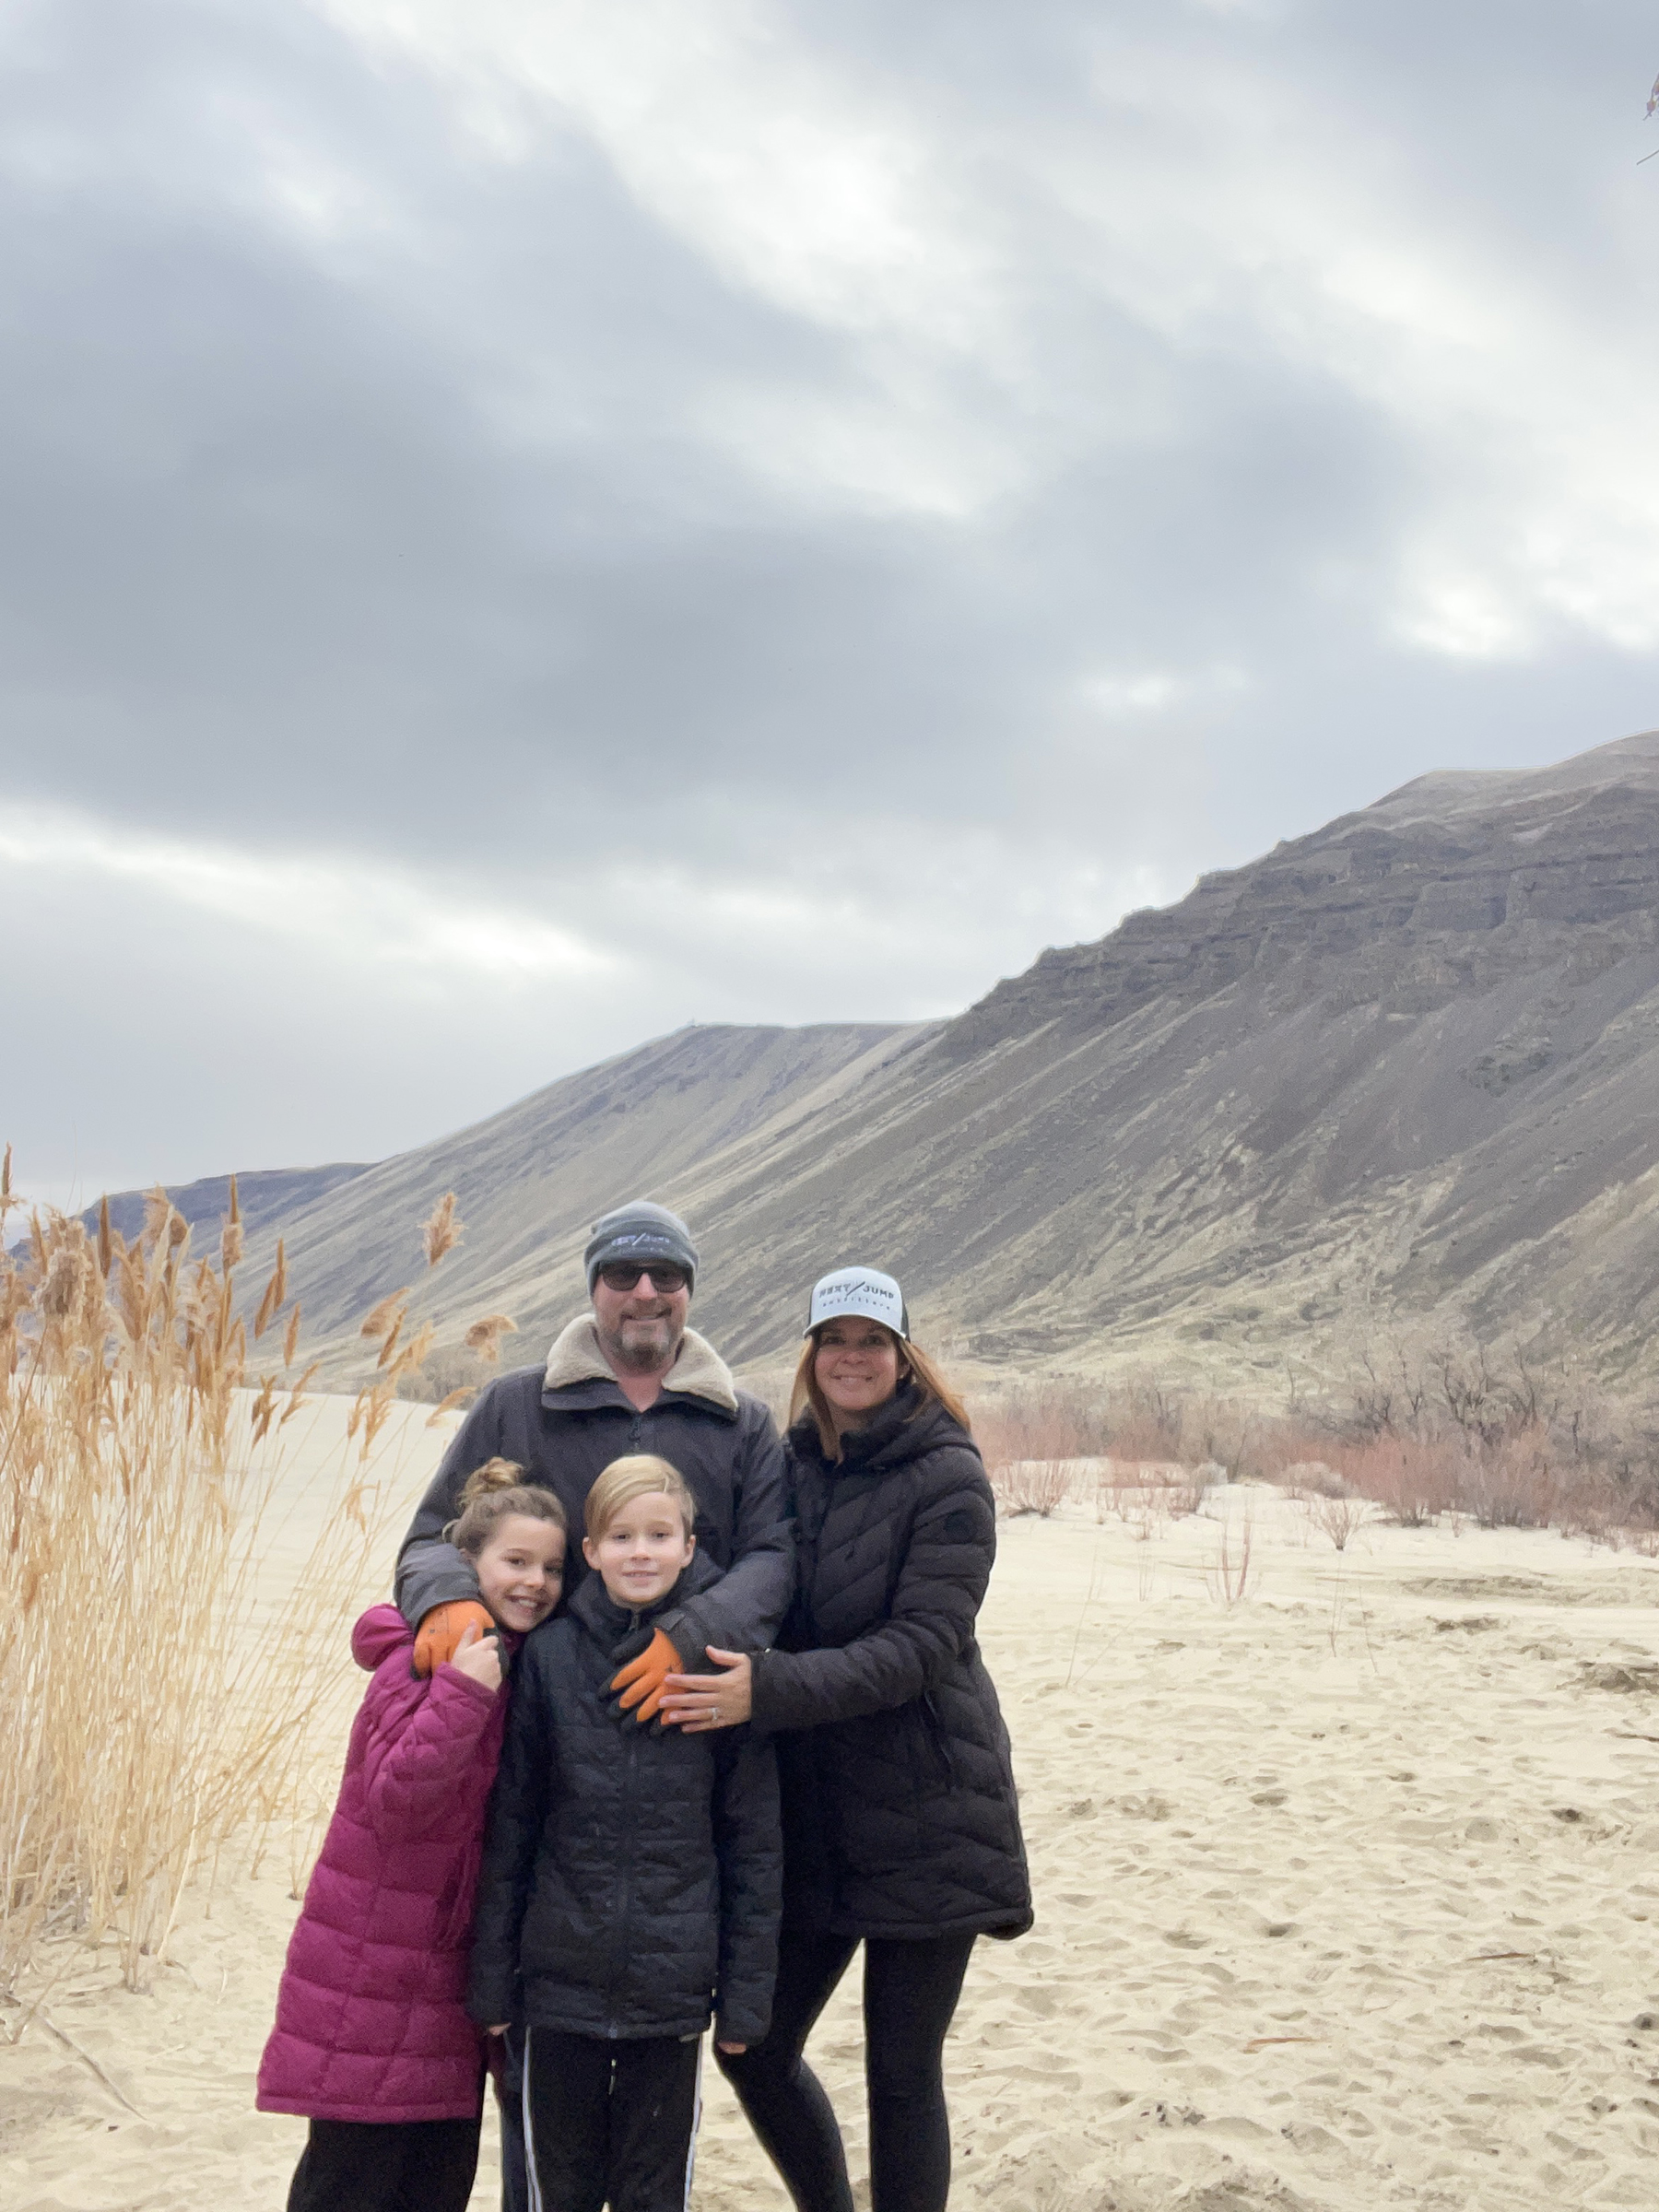 Next Jump Outfitters founder Jason Scott and Colleen and their two kids live the “jumplife” by either boating or overlanding as far off the grid as possible.